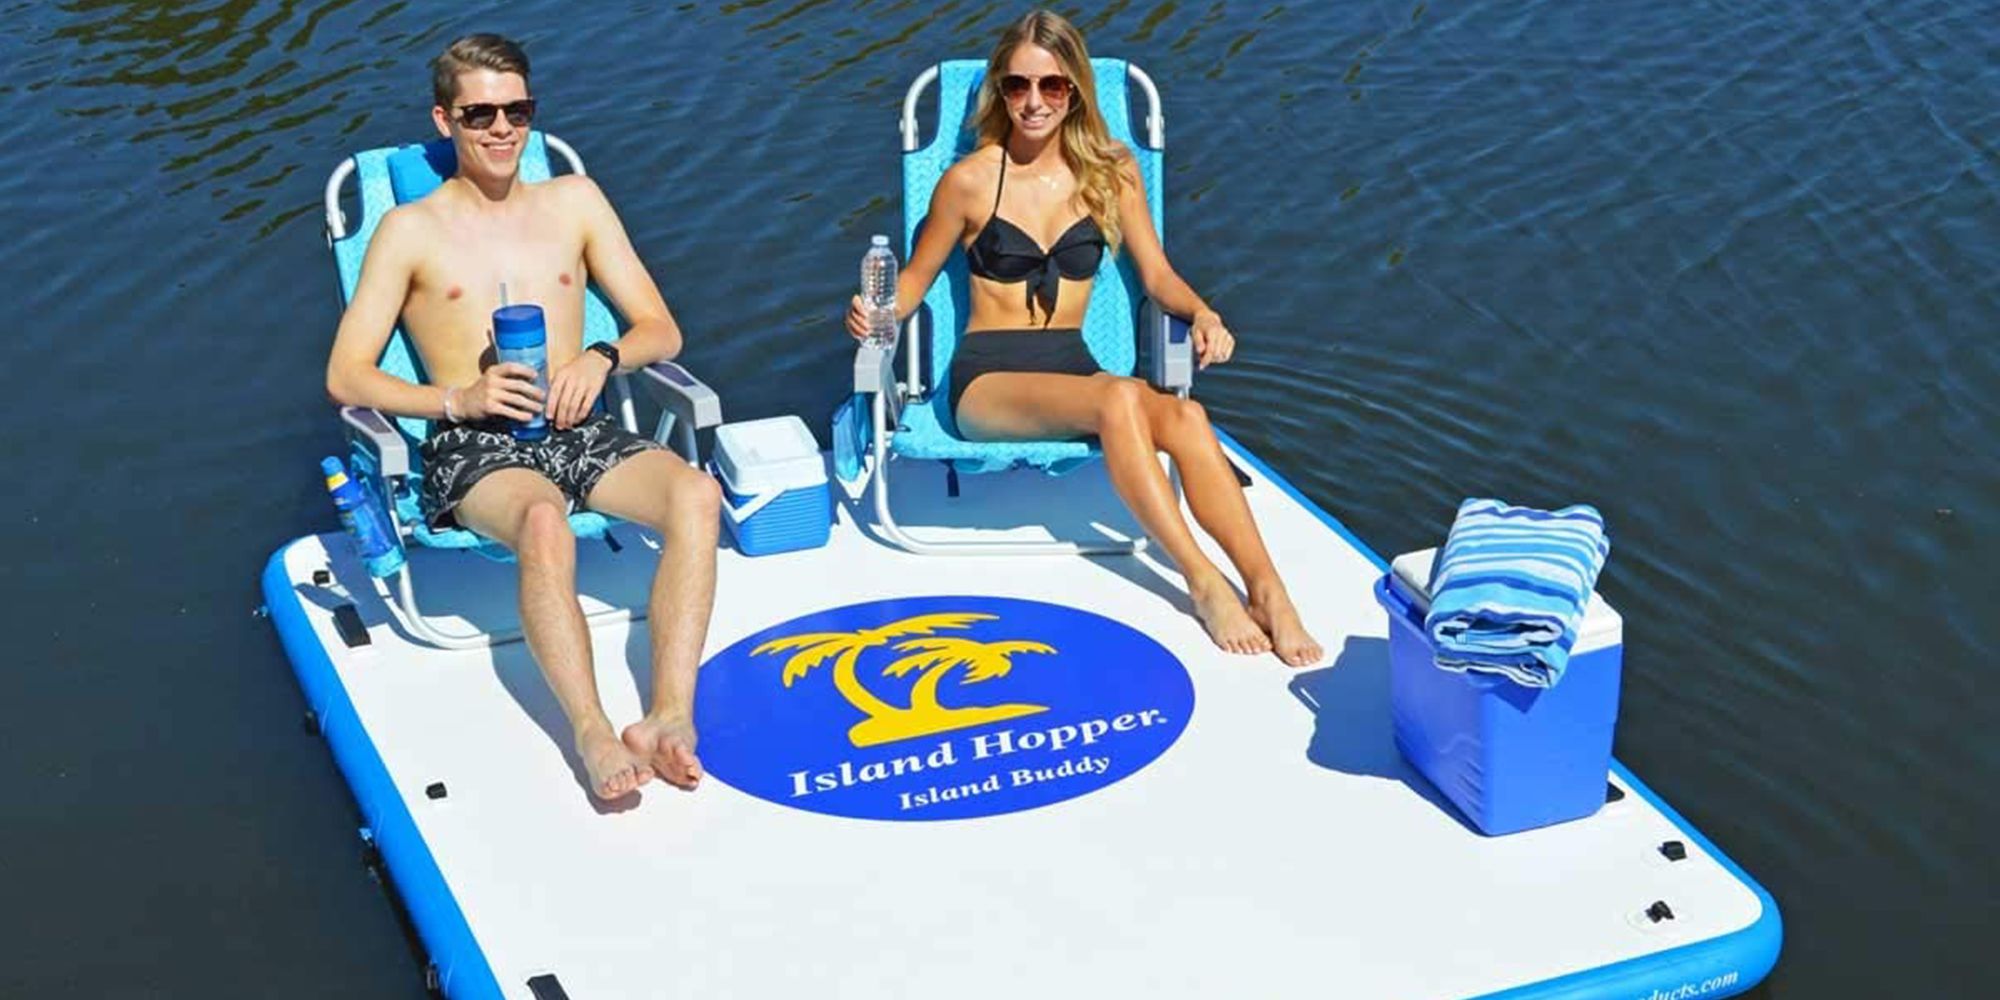 This 8-Foot Floating Platform Lets You Hang Out on the Water All